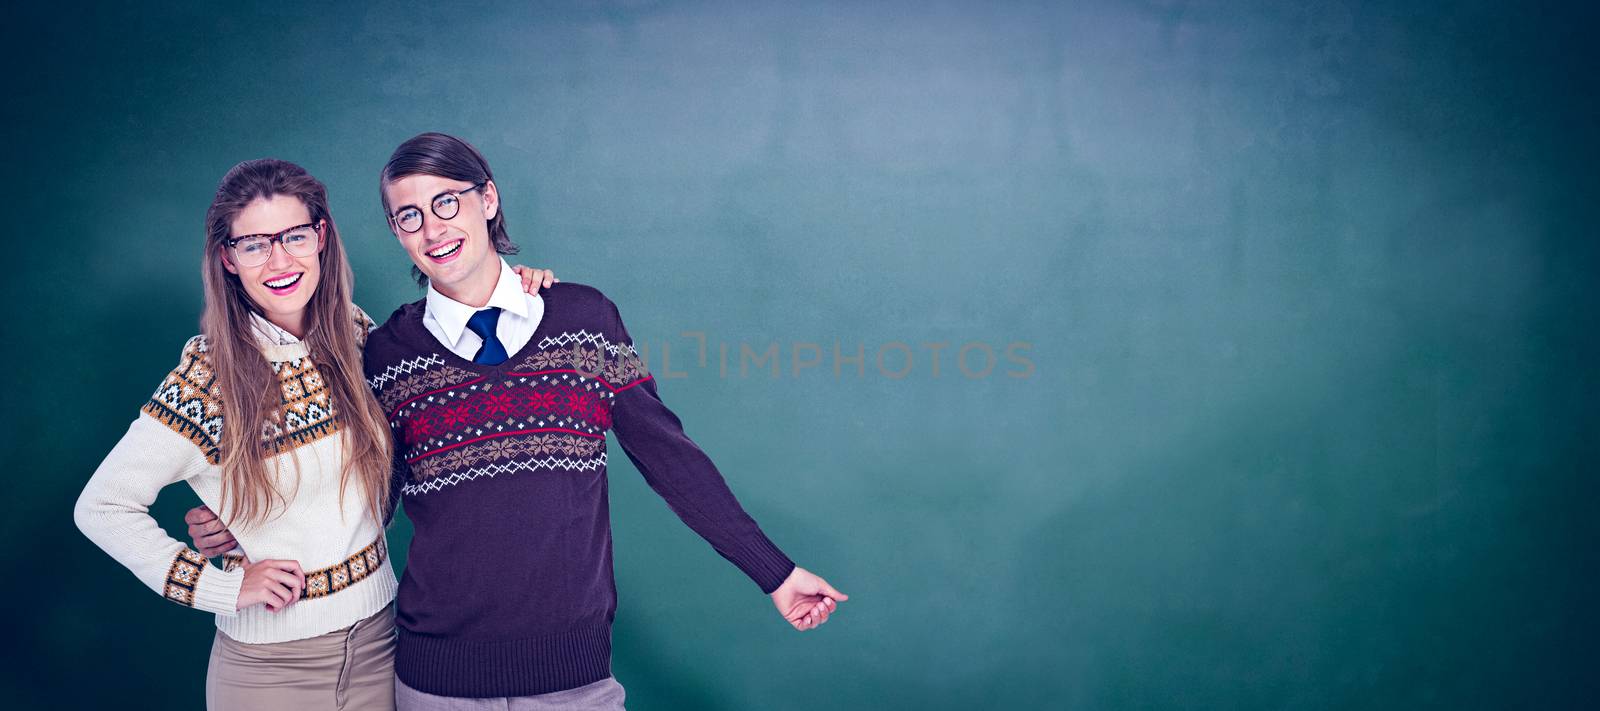 Happy geeky hipster couple embracing against green chalkboard